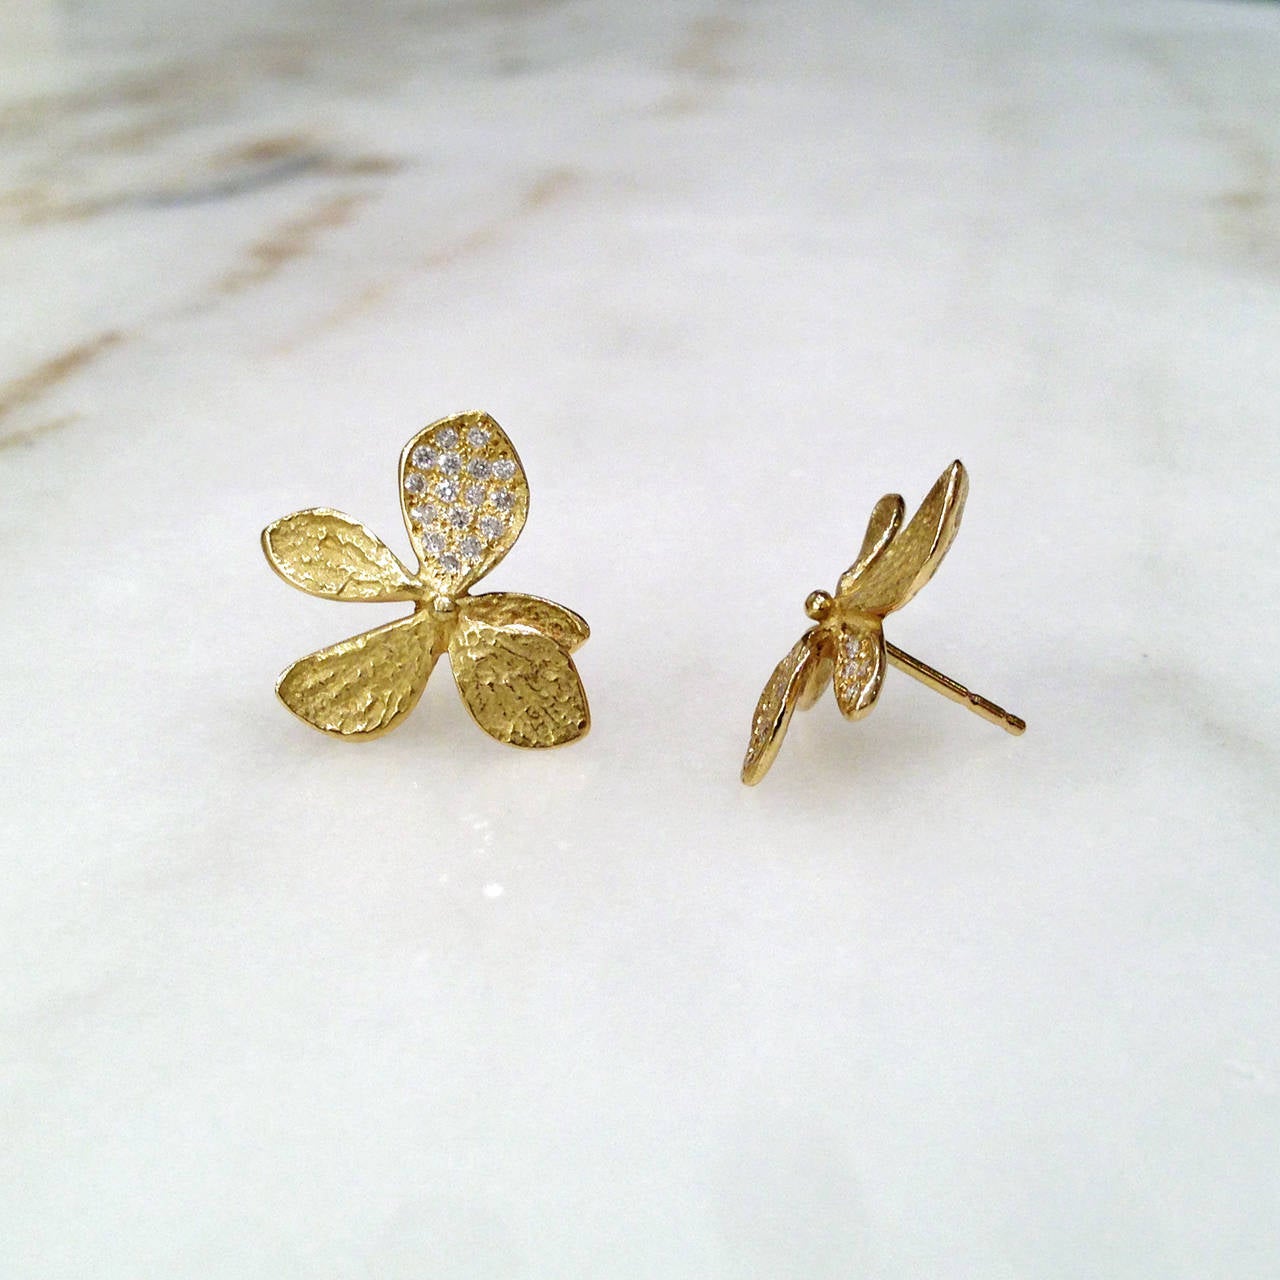  Pave Diamond Matte Gold Hydrangea Stud Earrings For Sale at 1stdibs